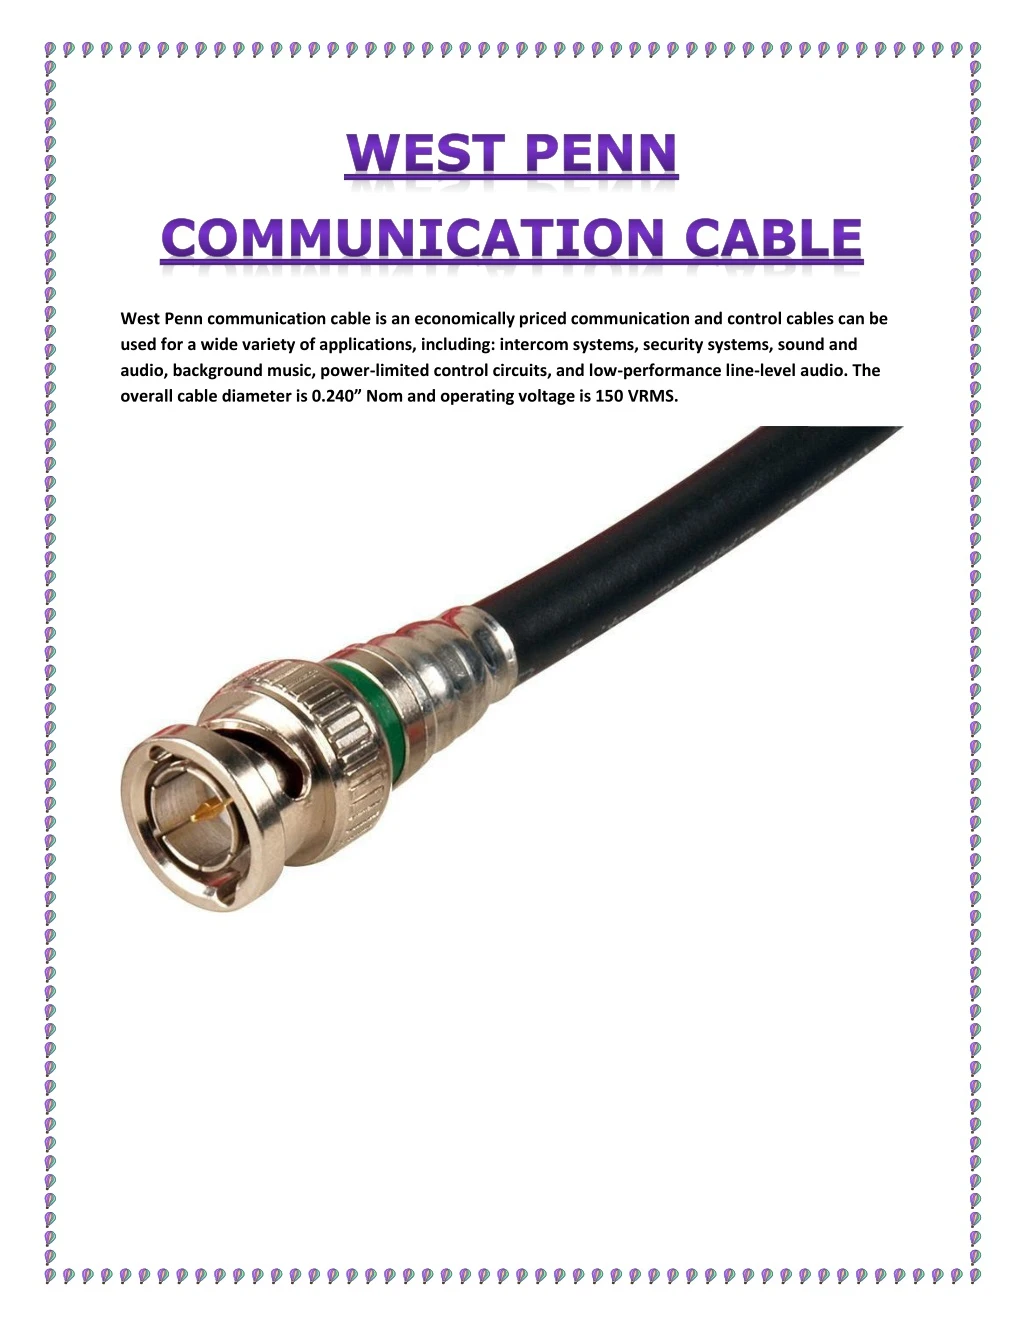 west penn communication cable is an economically